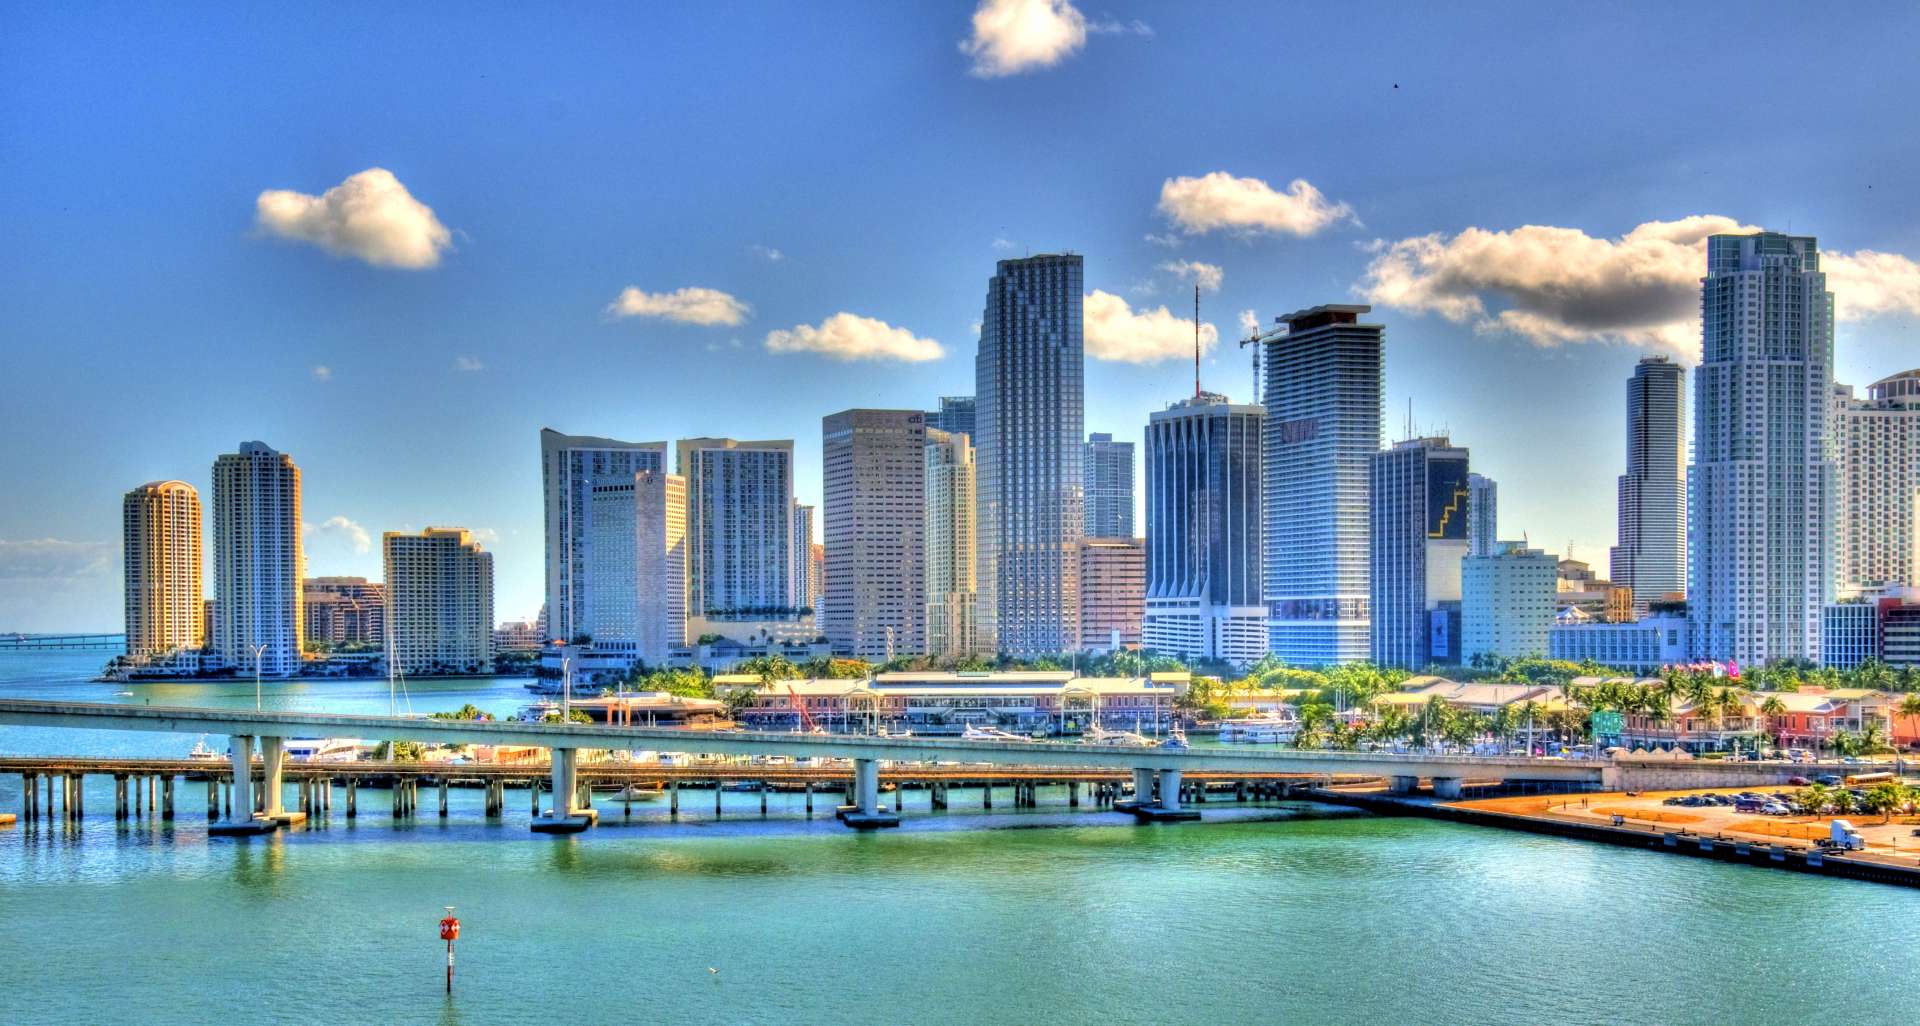 Route 3: Ft. Lauderdale - Miami Downtown - SkyEagle Air Tours